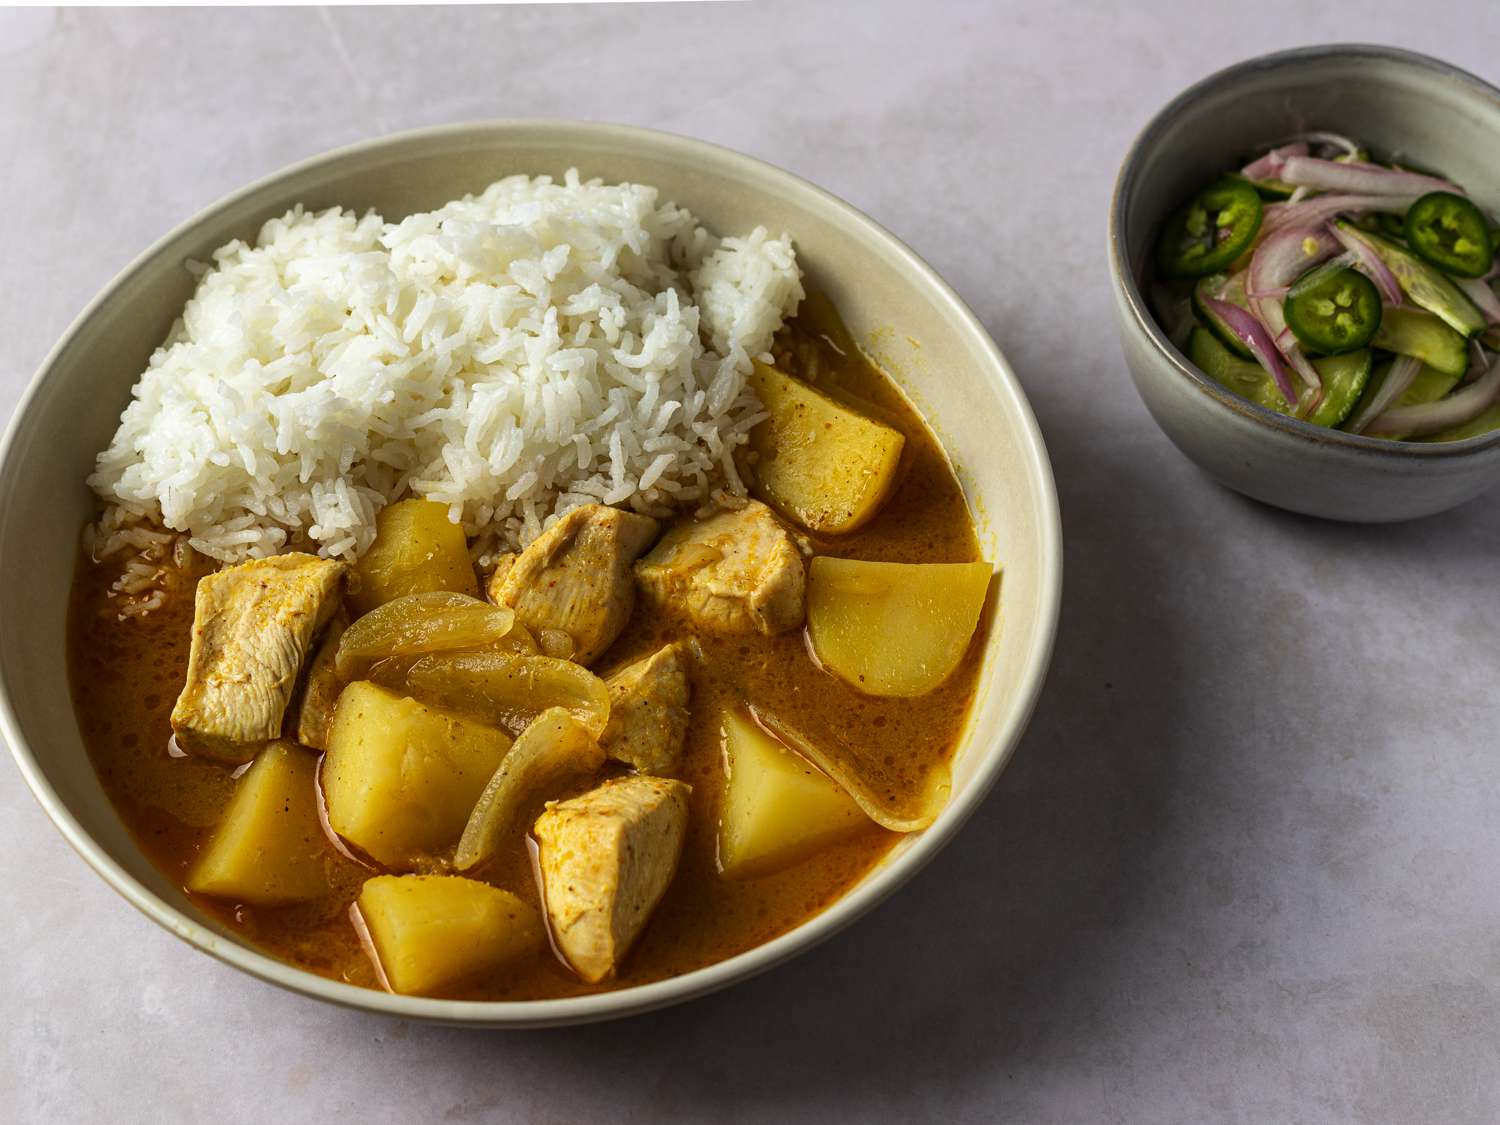 A ceramic bowl holding the chicken curry and rice, with another smaller bowl on the right hand side holding the vegetable salad.